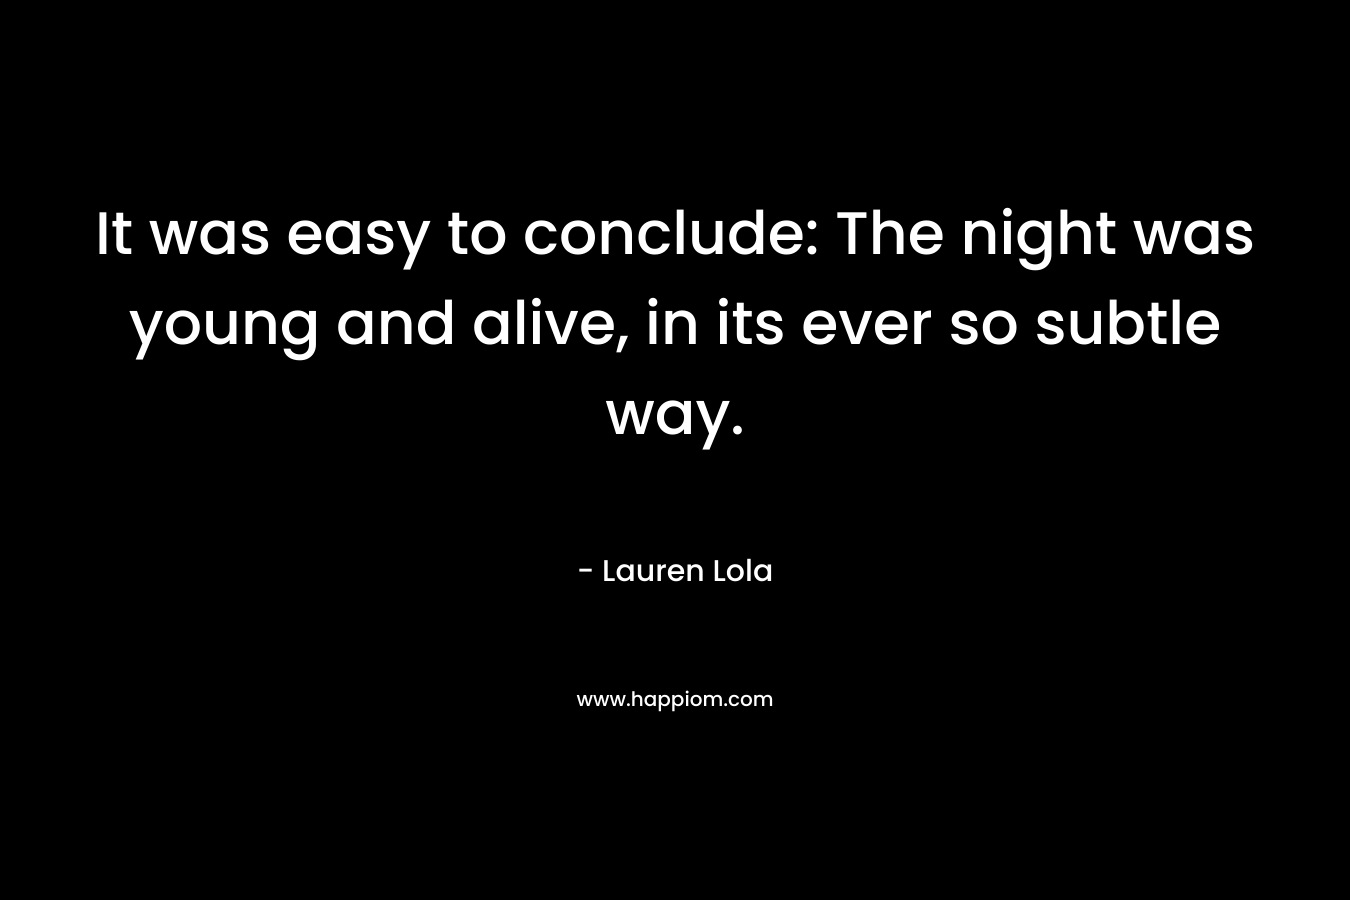 It was easy to conclude: The night was young and alive, in its ever so subtle way. – Lauren Lola